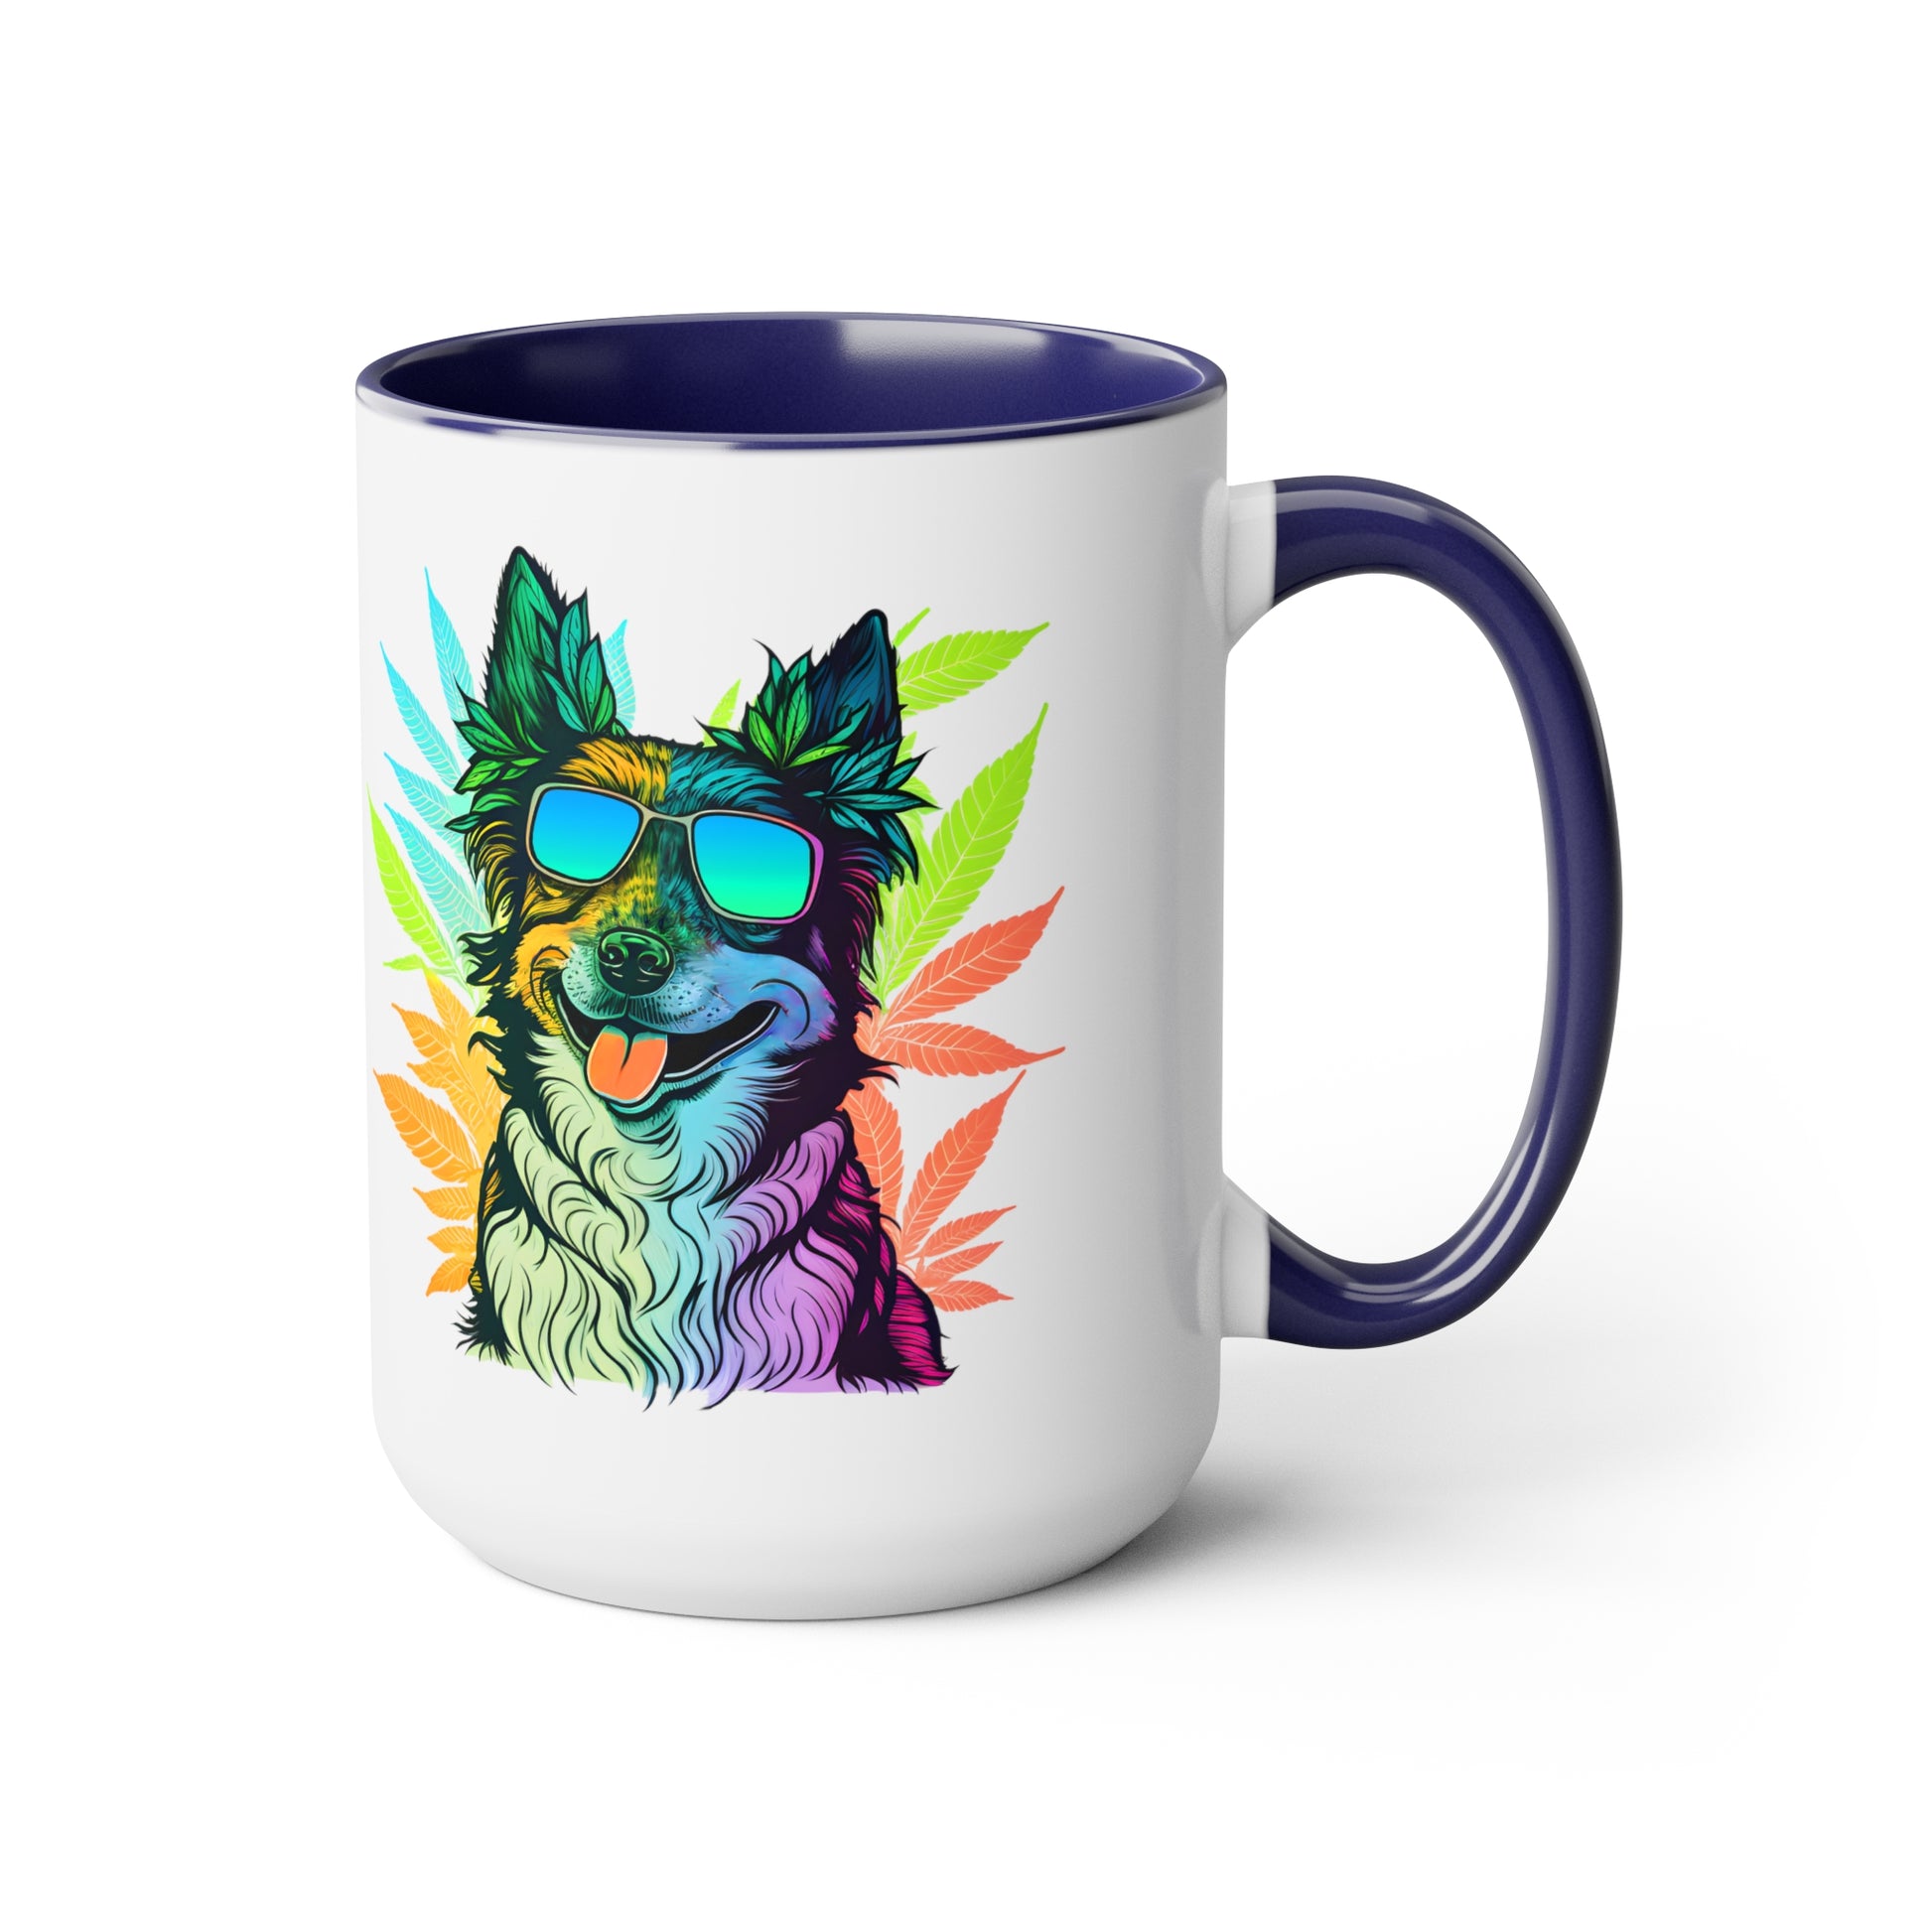 A Cannabis Border Collie Mug with an image of a dog wearing sunglasses.